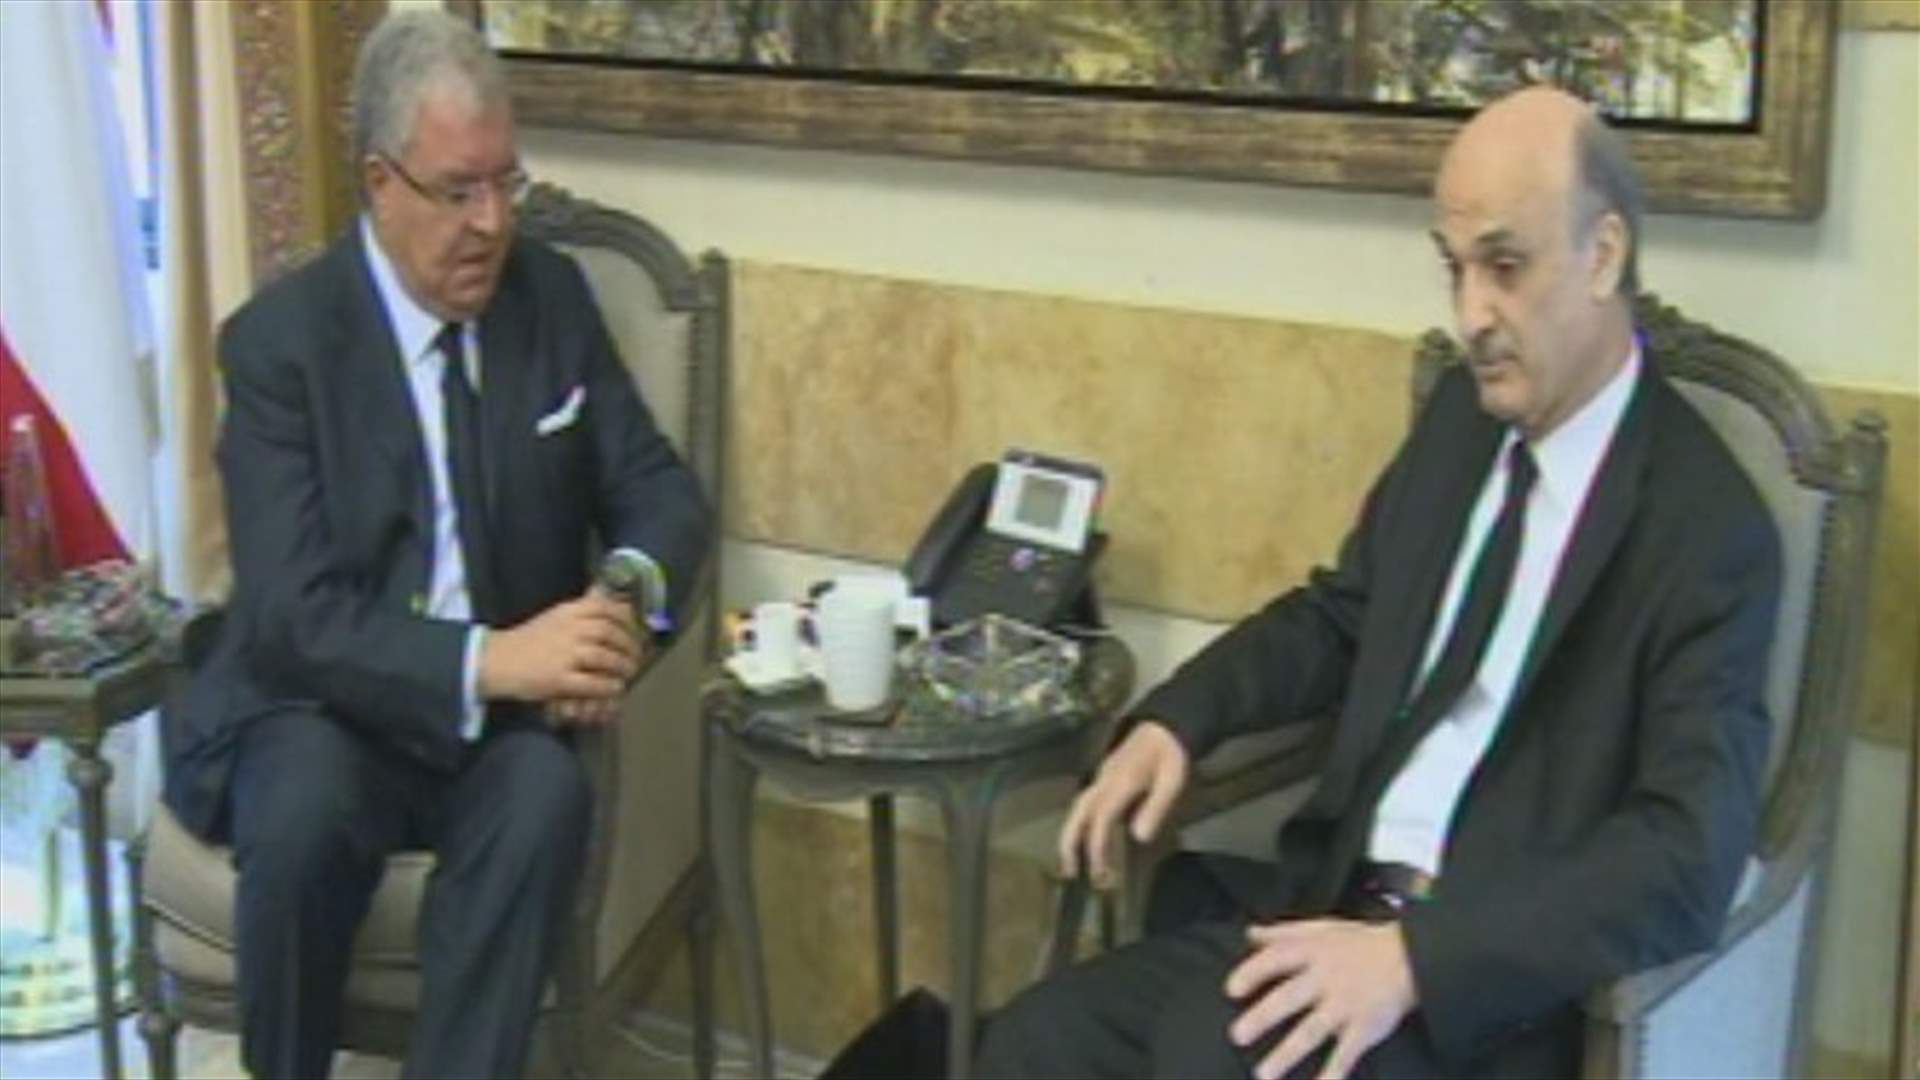 Geagea meets with Minister Mashnouq at Interior Ministry